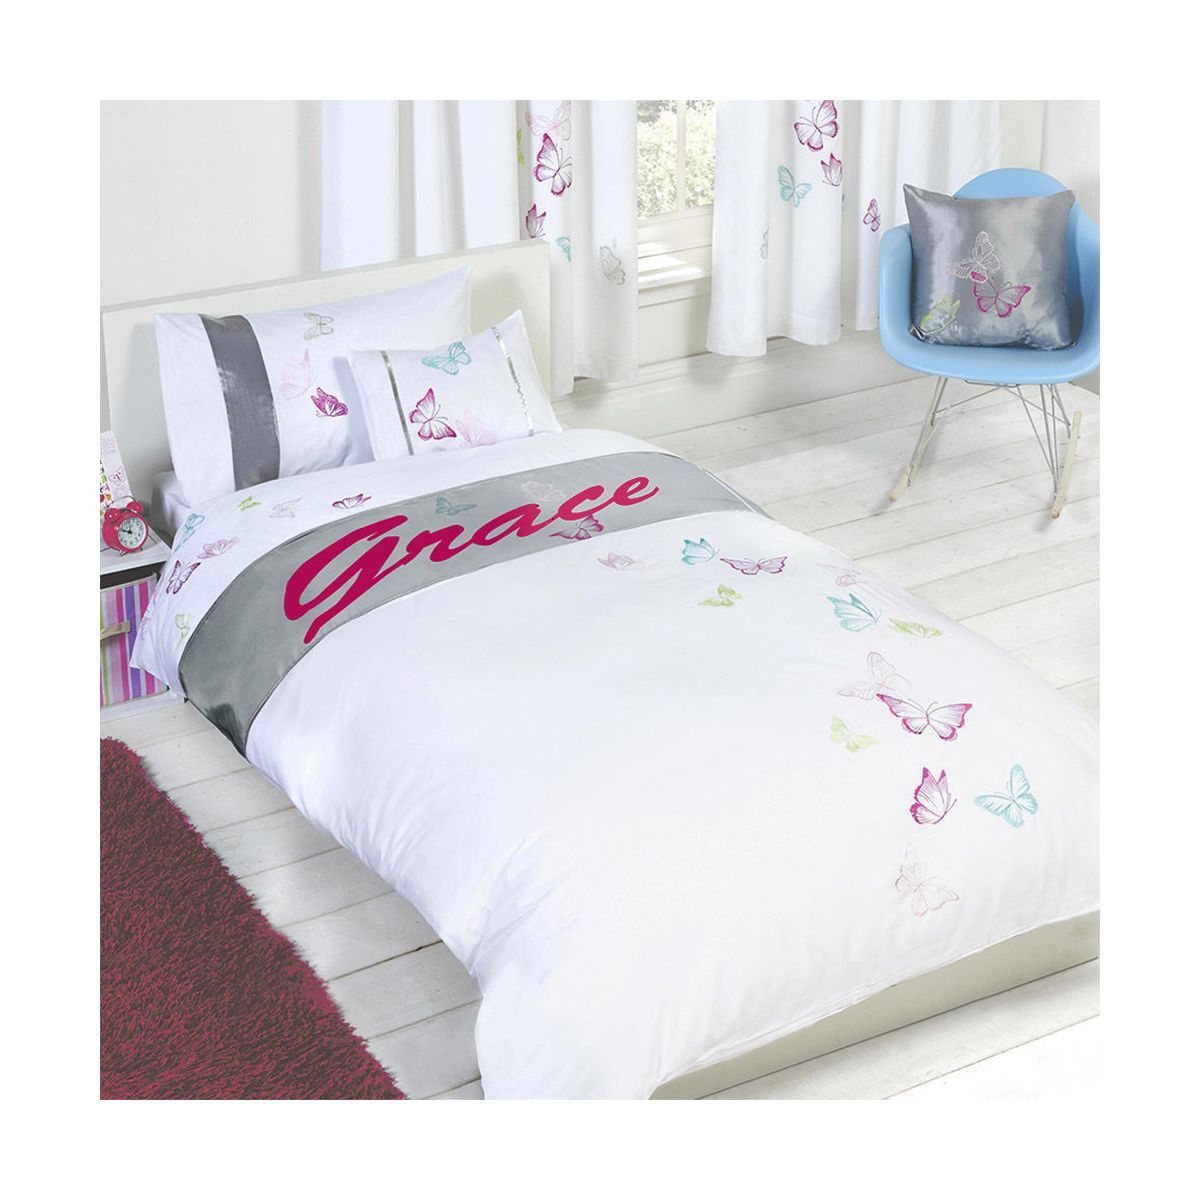 Grace - Personalised Butterfly Duvet Cover Set